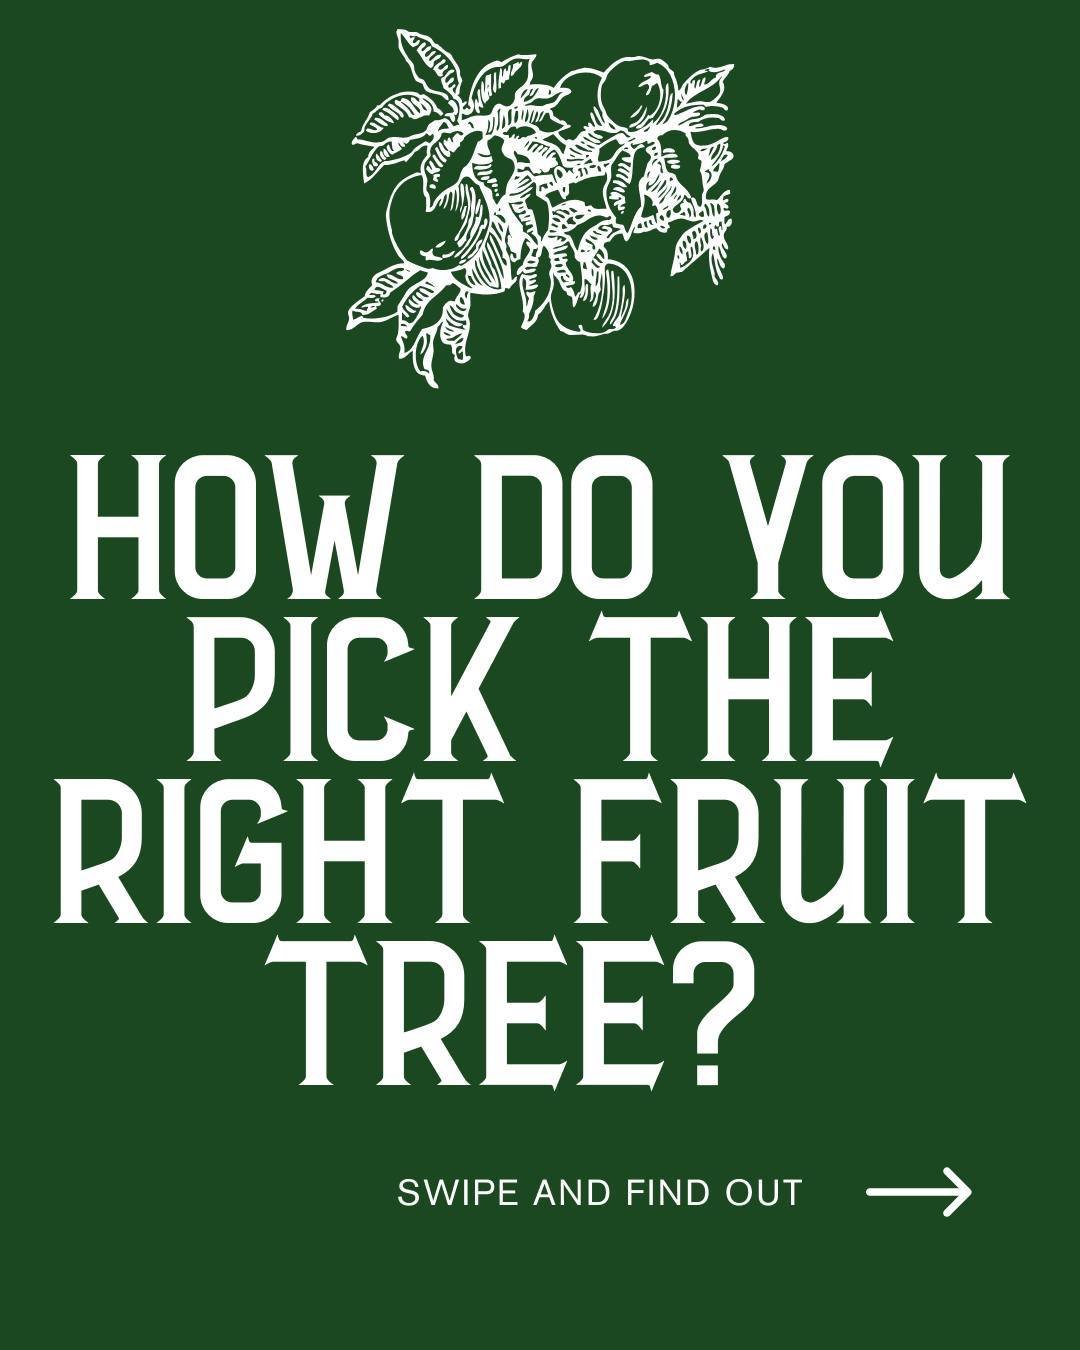 Looking to plant a fruit tree? 🌳🍑 

Learn essential tips to ensure it thrives in your garden, from selecting the right variety to preparing the perfect planting site! 

#GardeningTips #BackyardOrchard #FruitTreePlanting #EcoFriendly #HealthyEating